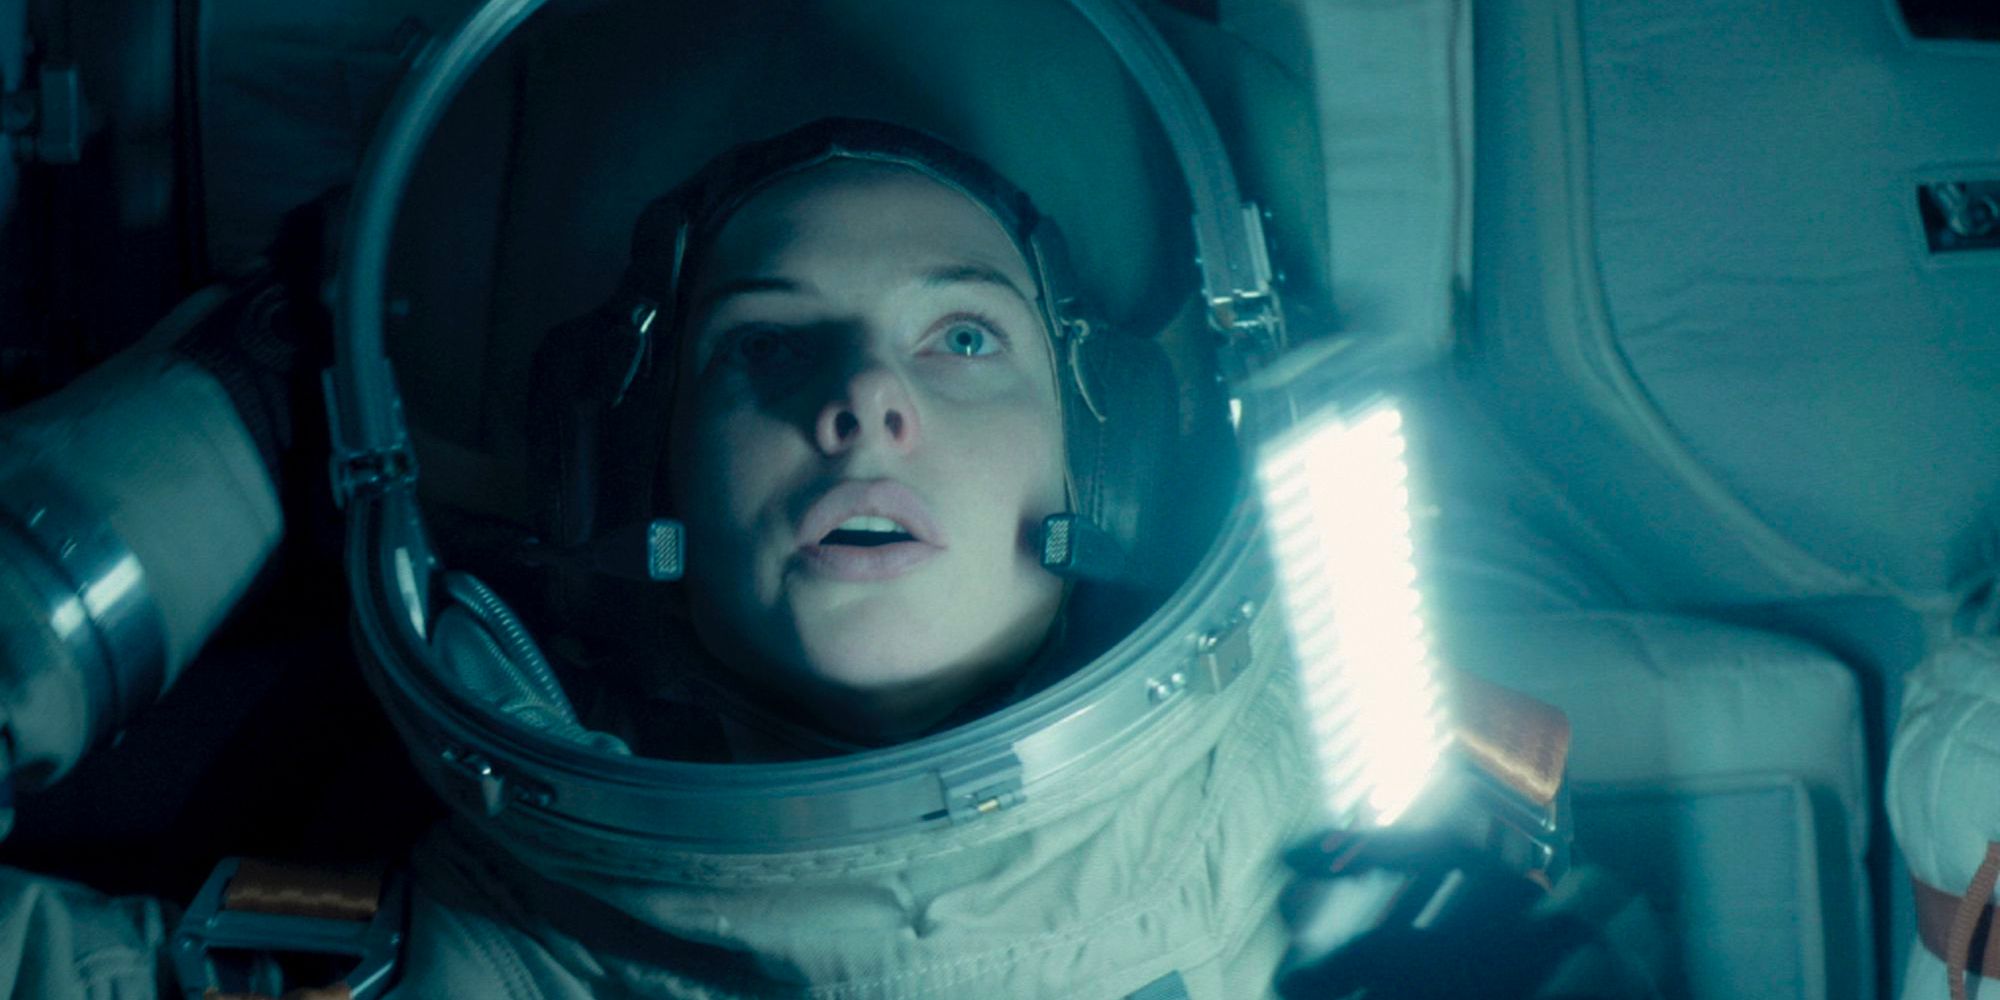 Where To Watch ‘I.S.S.’ — When Does the Space Station Thriller Hit ...